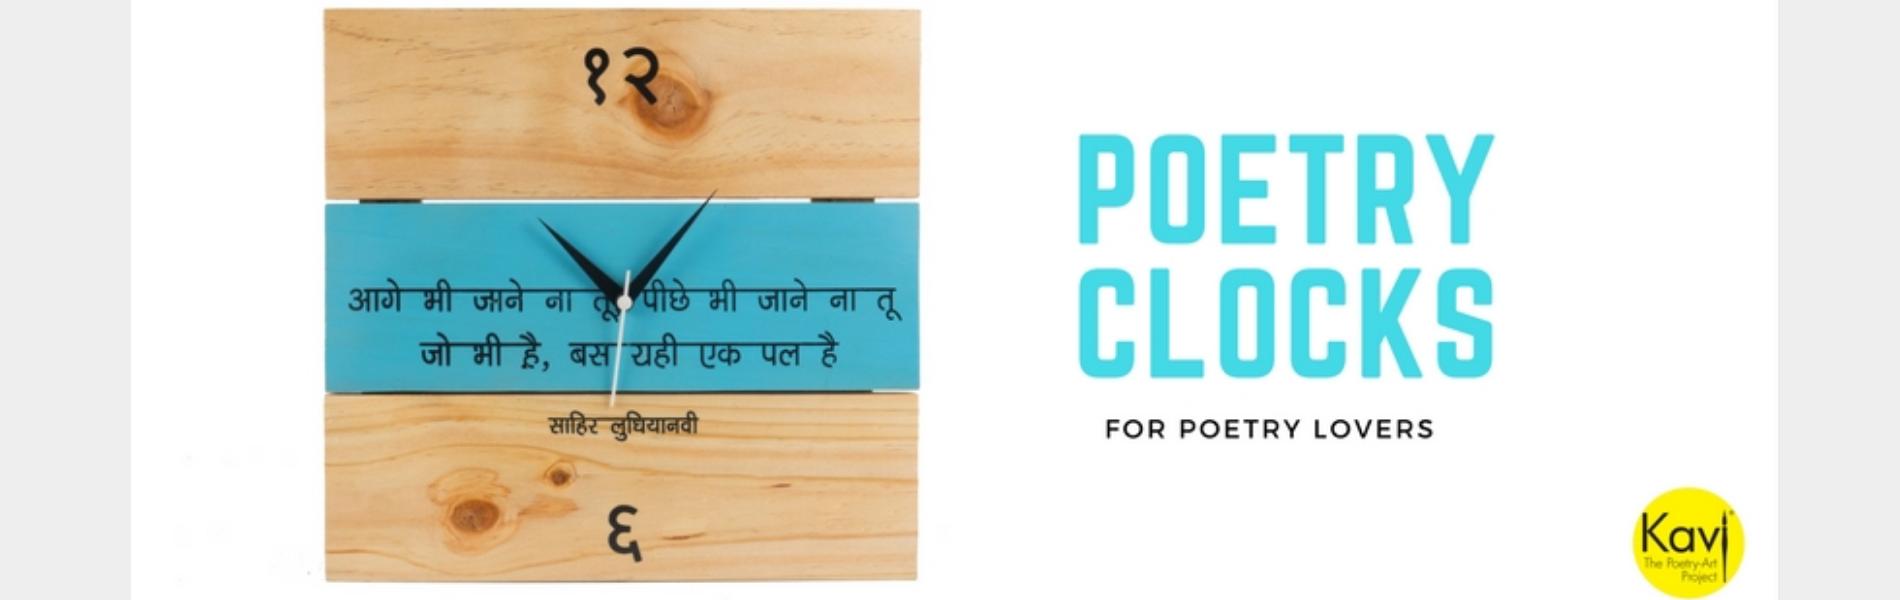 Kavi The Poetry-Art Project